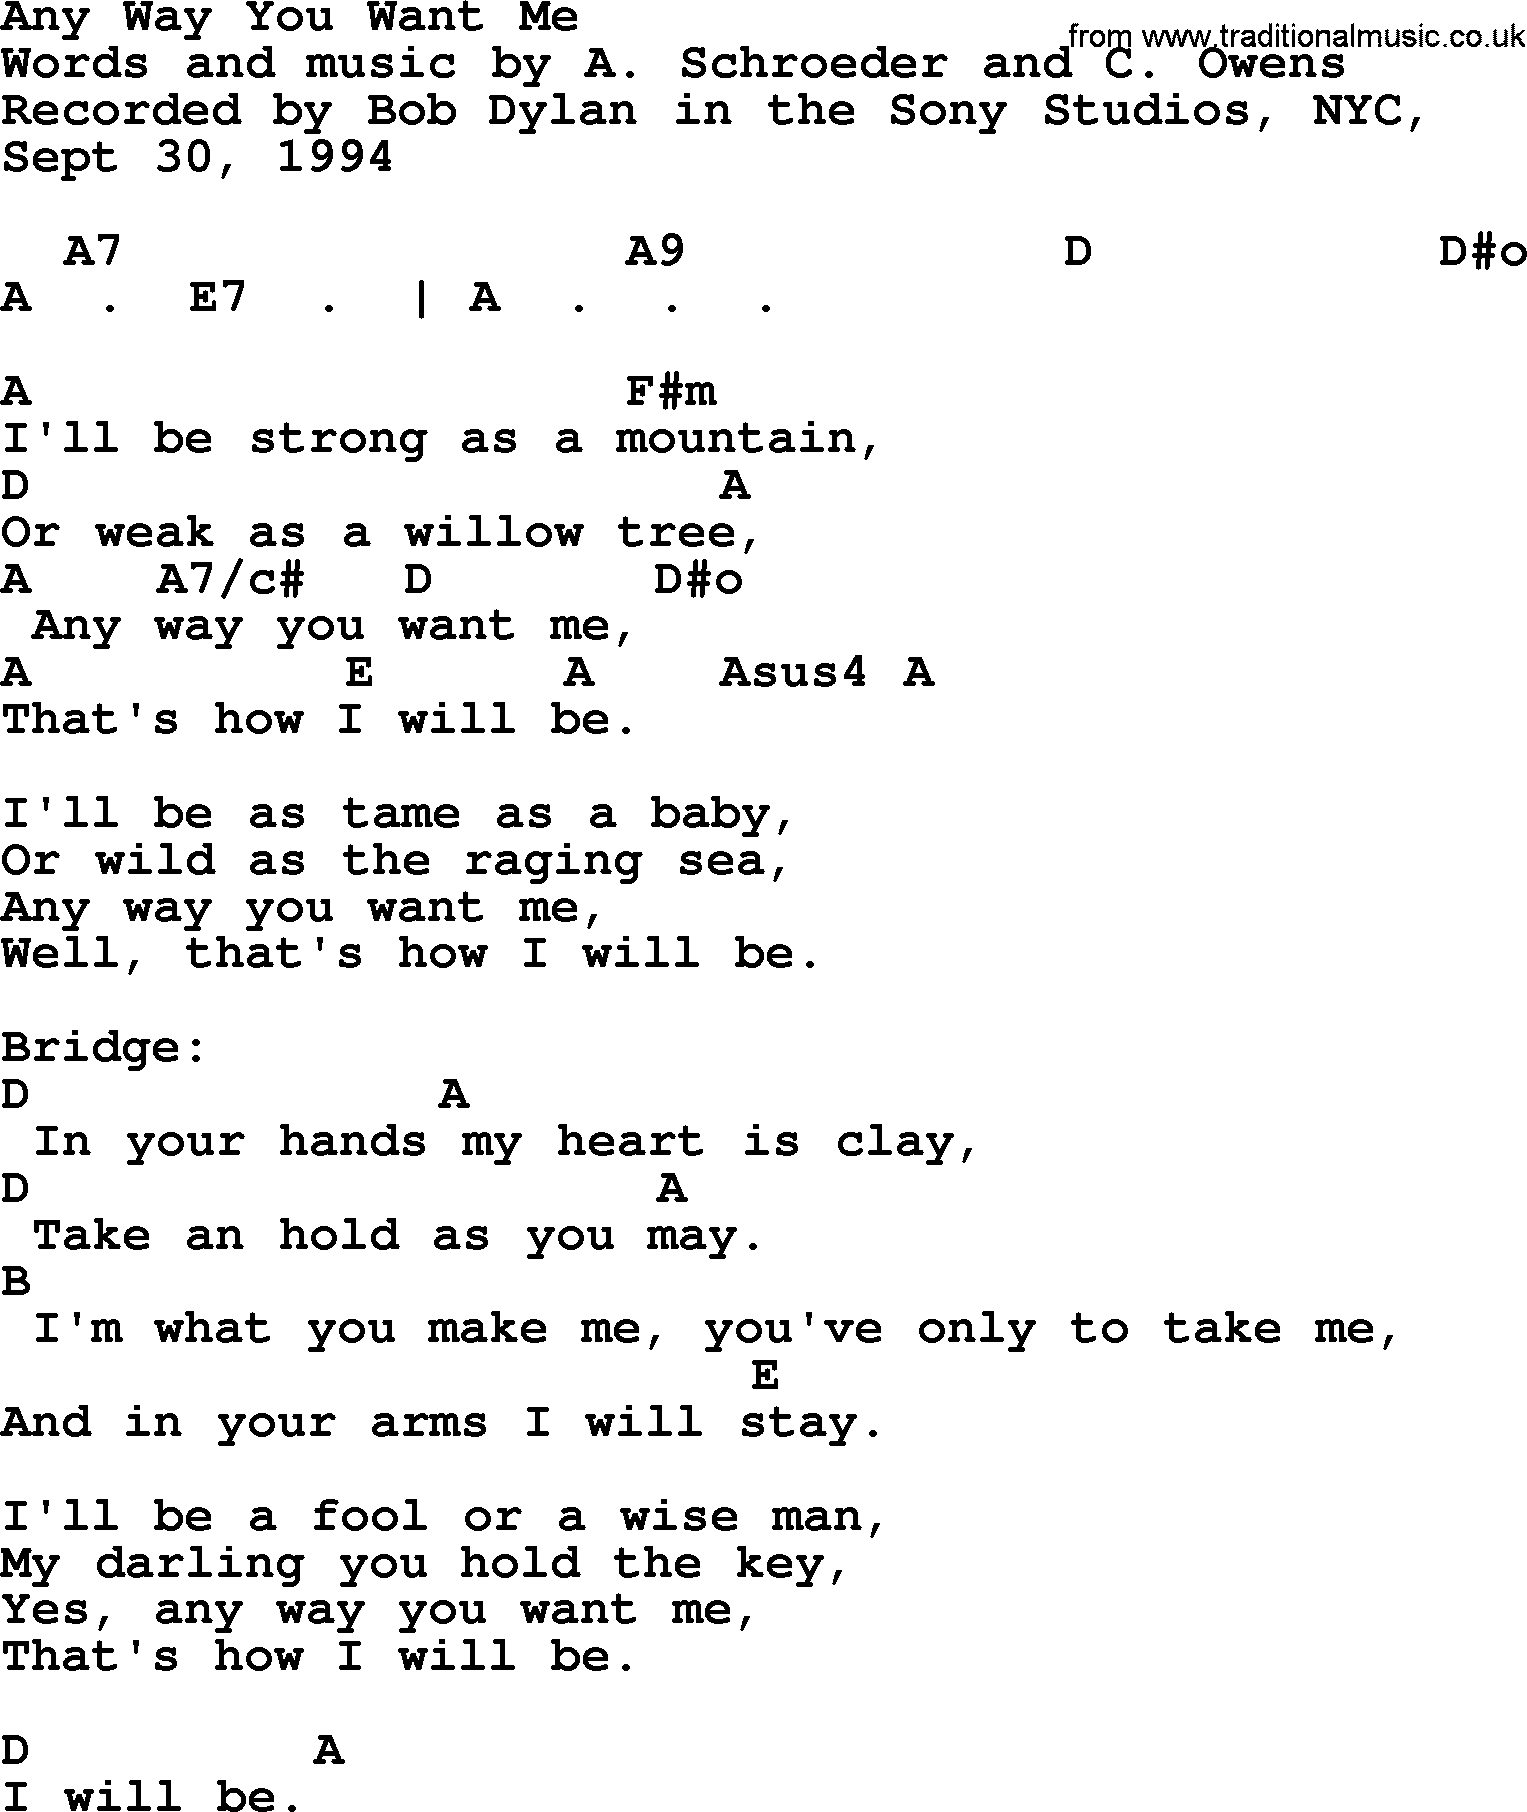 Bob Dylan song, lyrics with chords - Any Way You Want Me